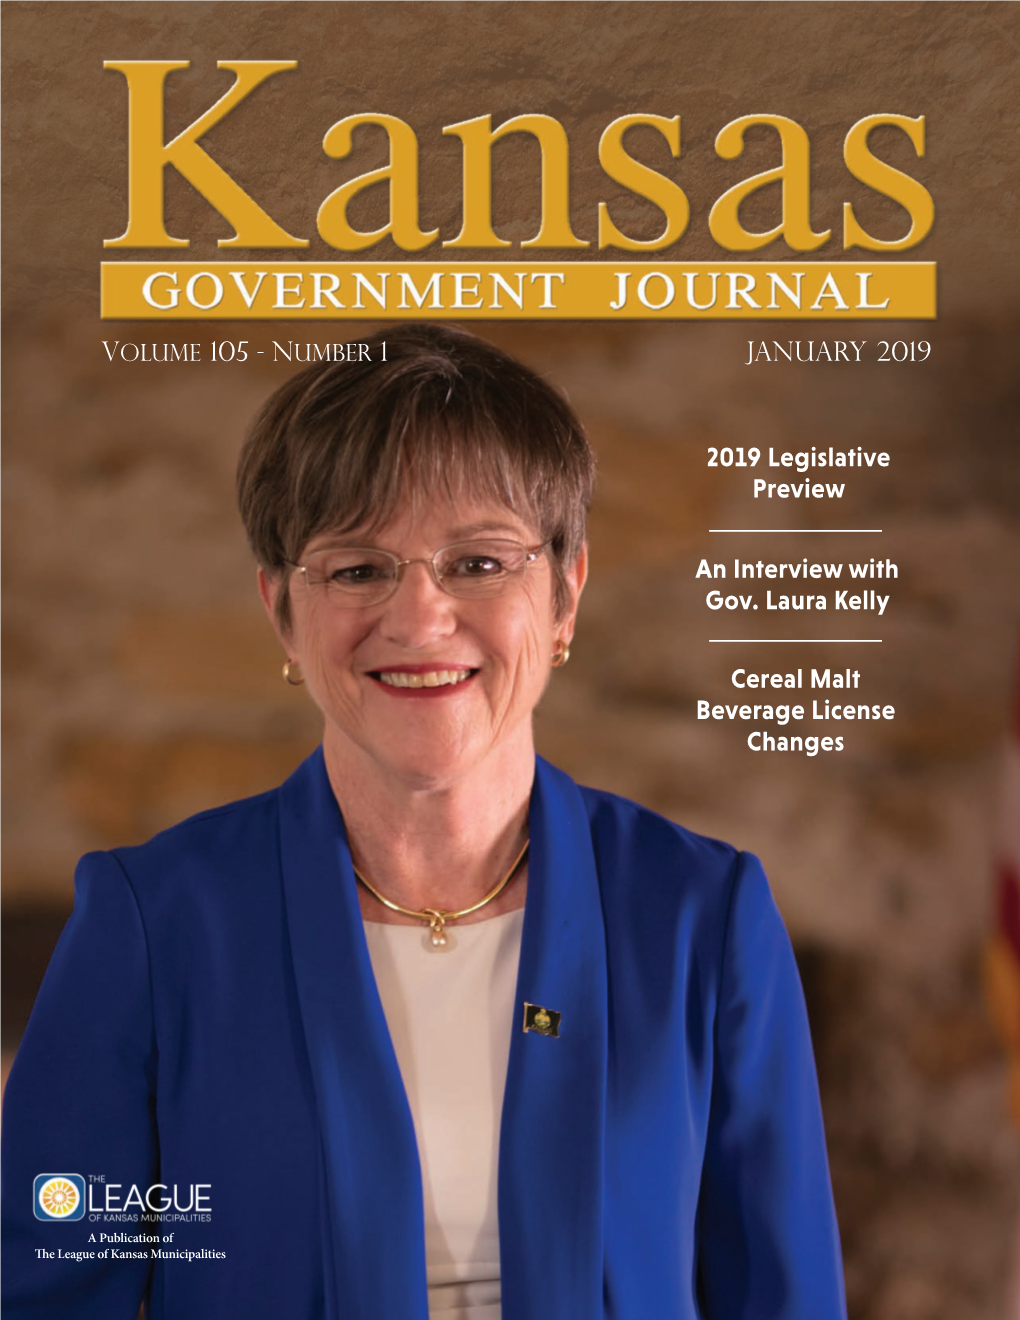 January 2019 2019 Legislative Preview an Interview with Gov. Laura Kelly Cereal Malt Beverage License Changes